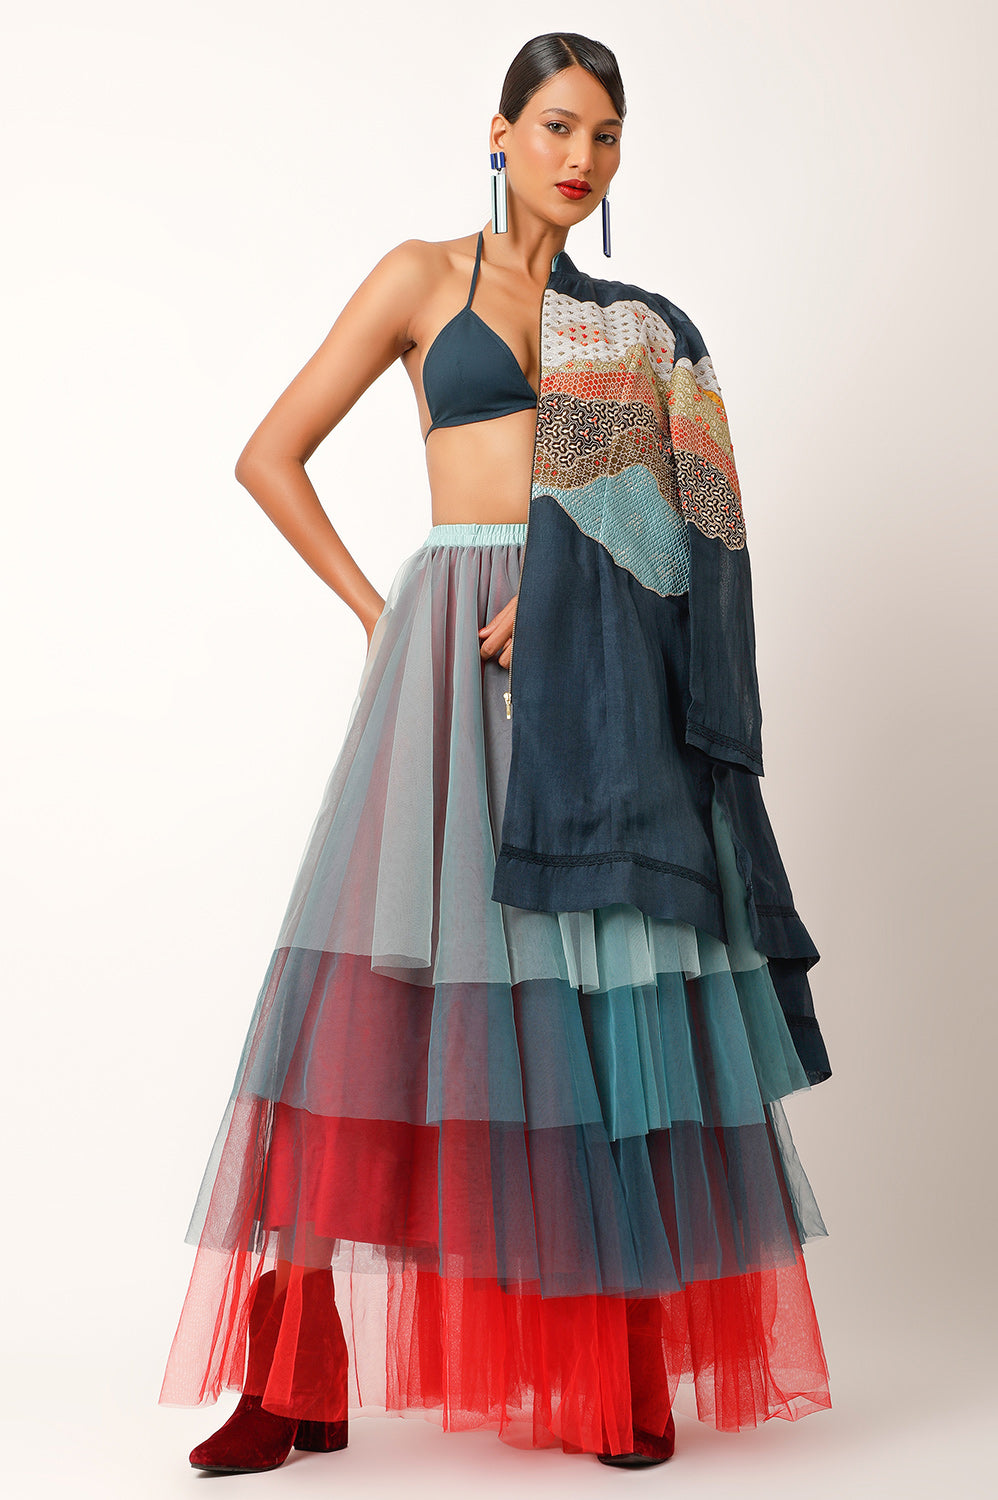 MULTICOLORED TULLE SKIRT